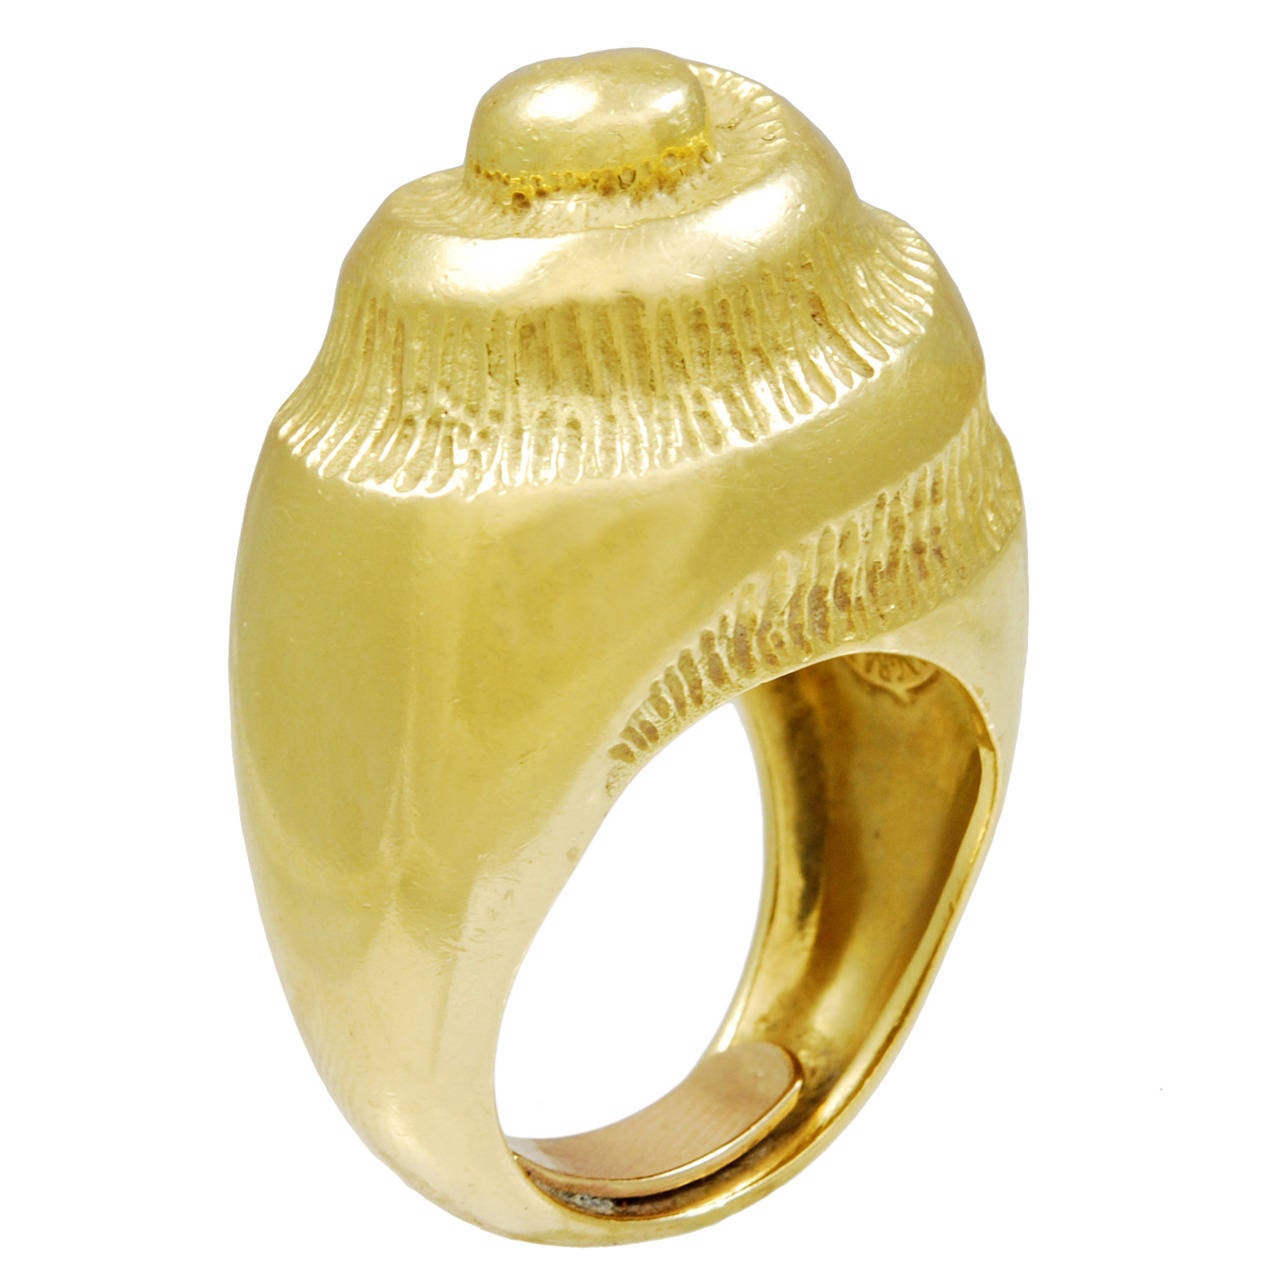 Gold Ring Resembling a Gastropod Shell